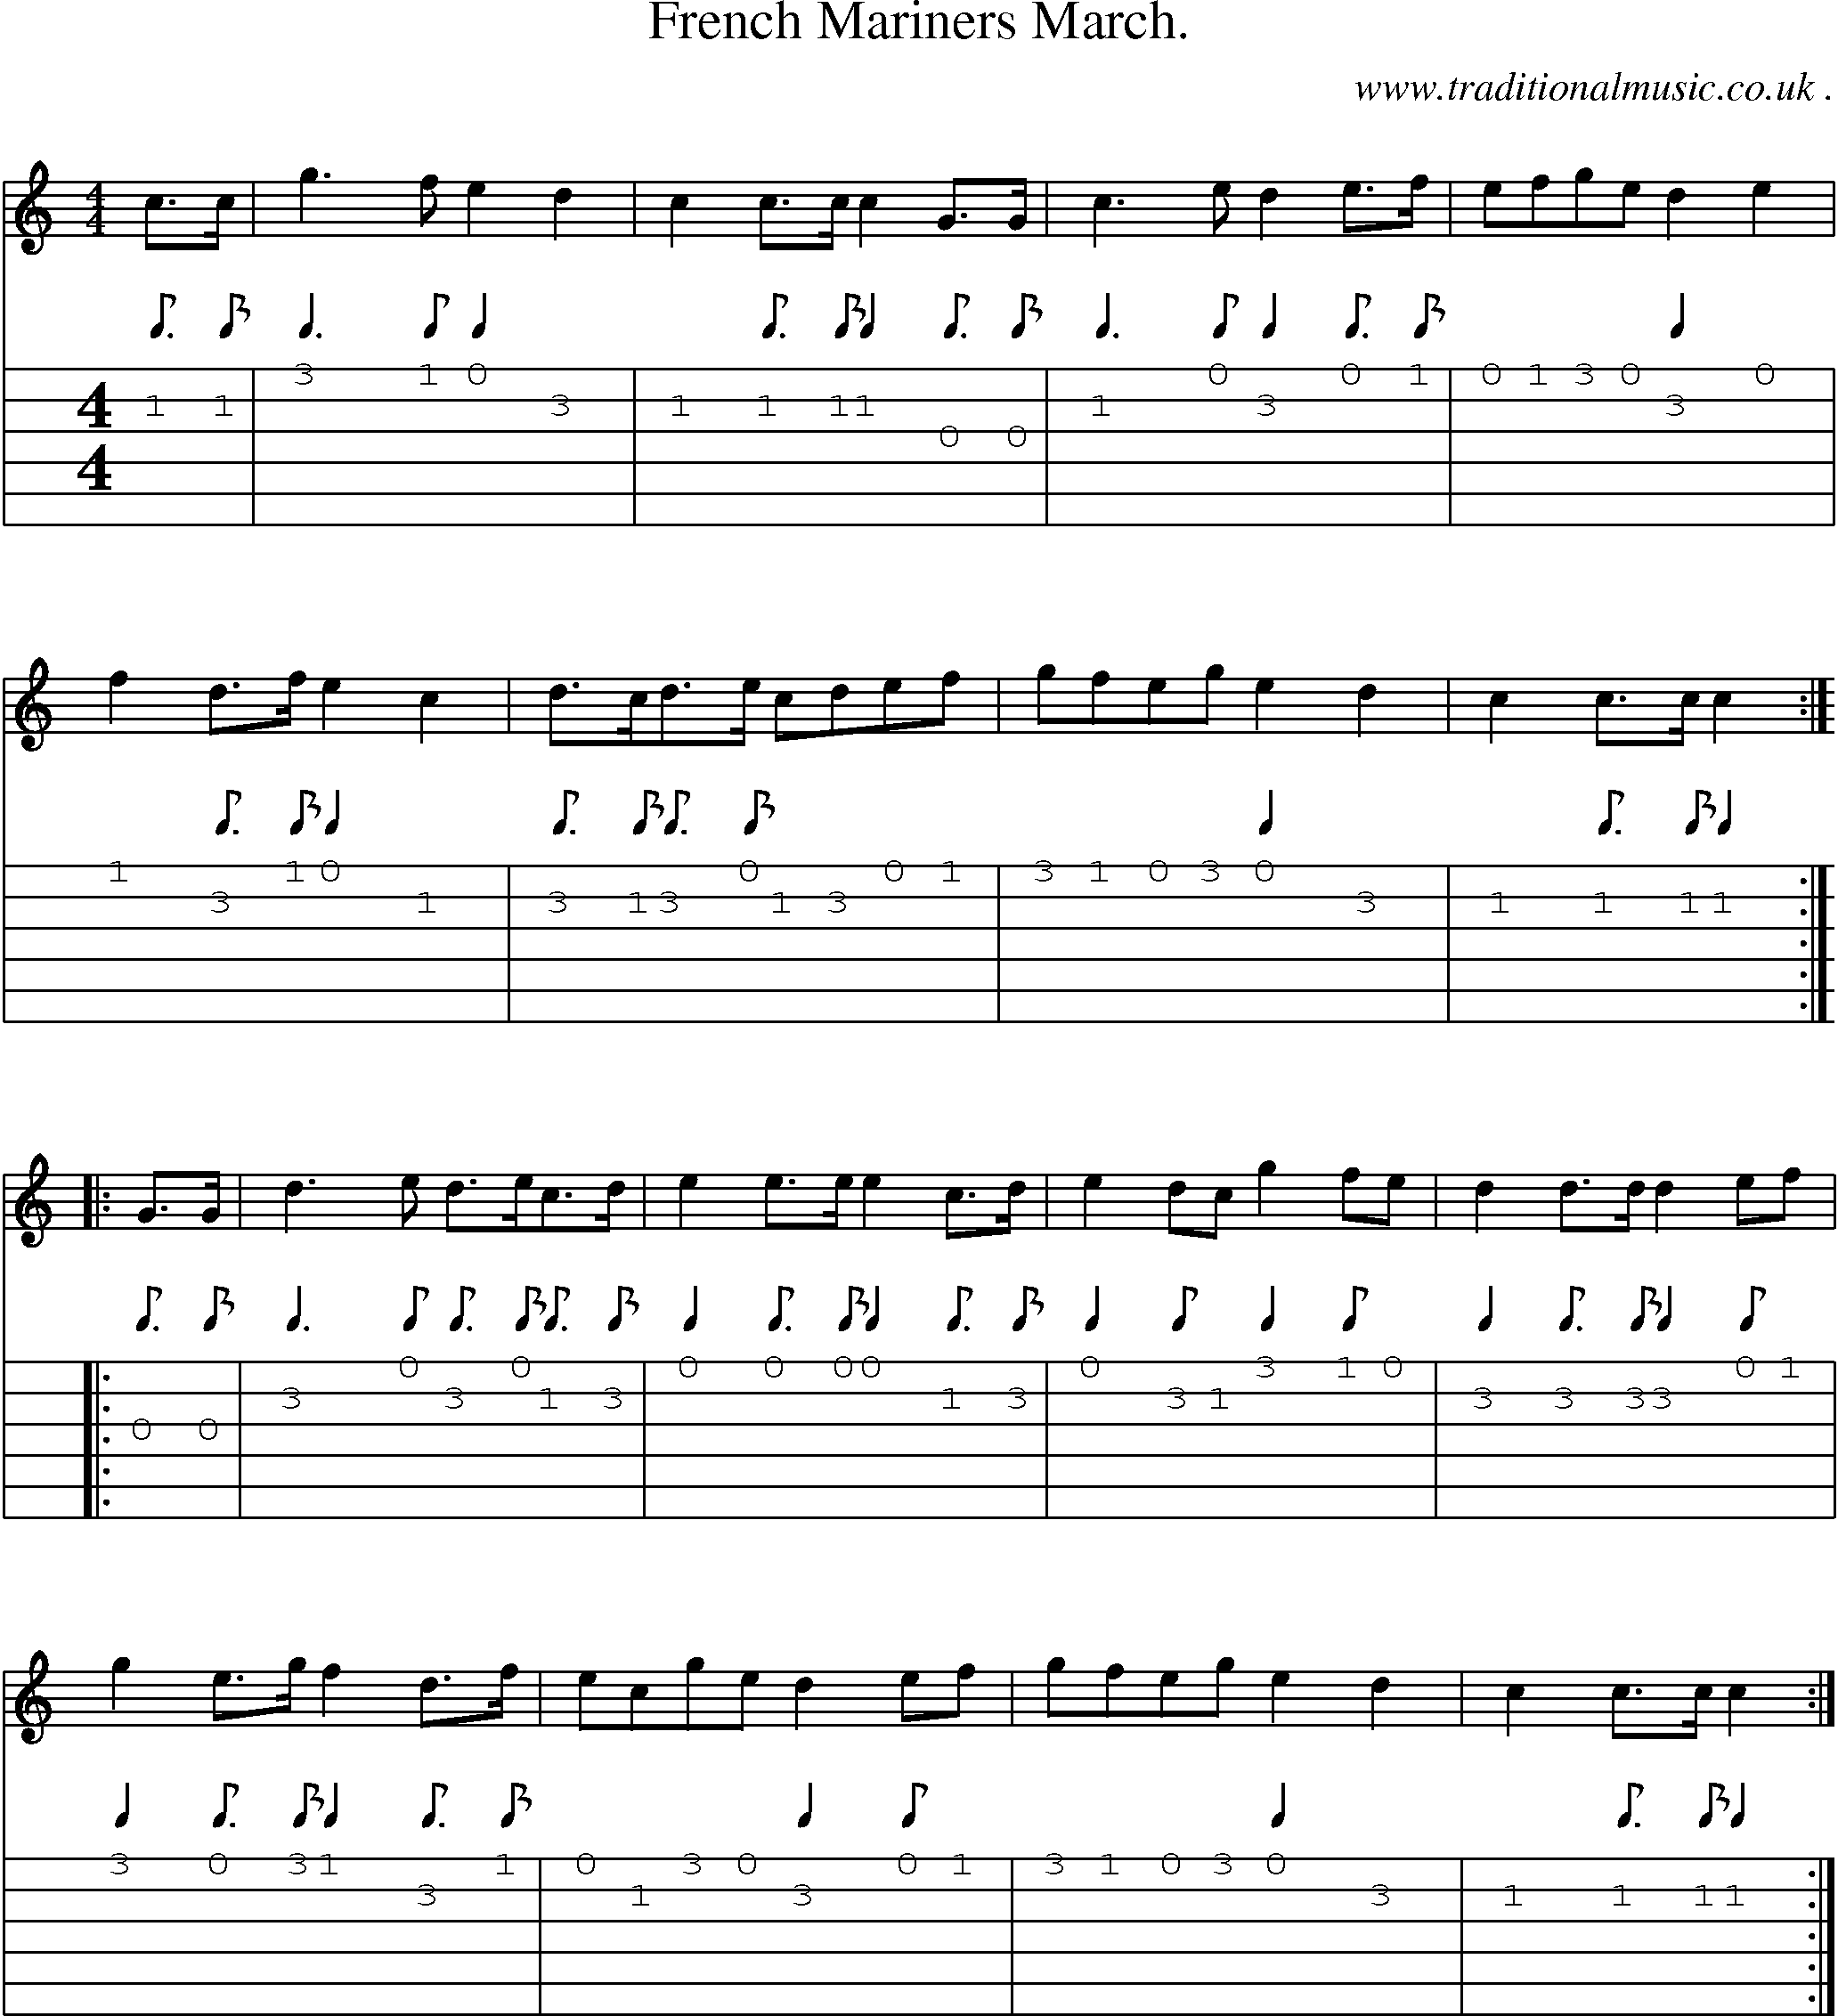 Sheet-Music and Guitar Tabs for French Mariners March